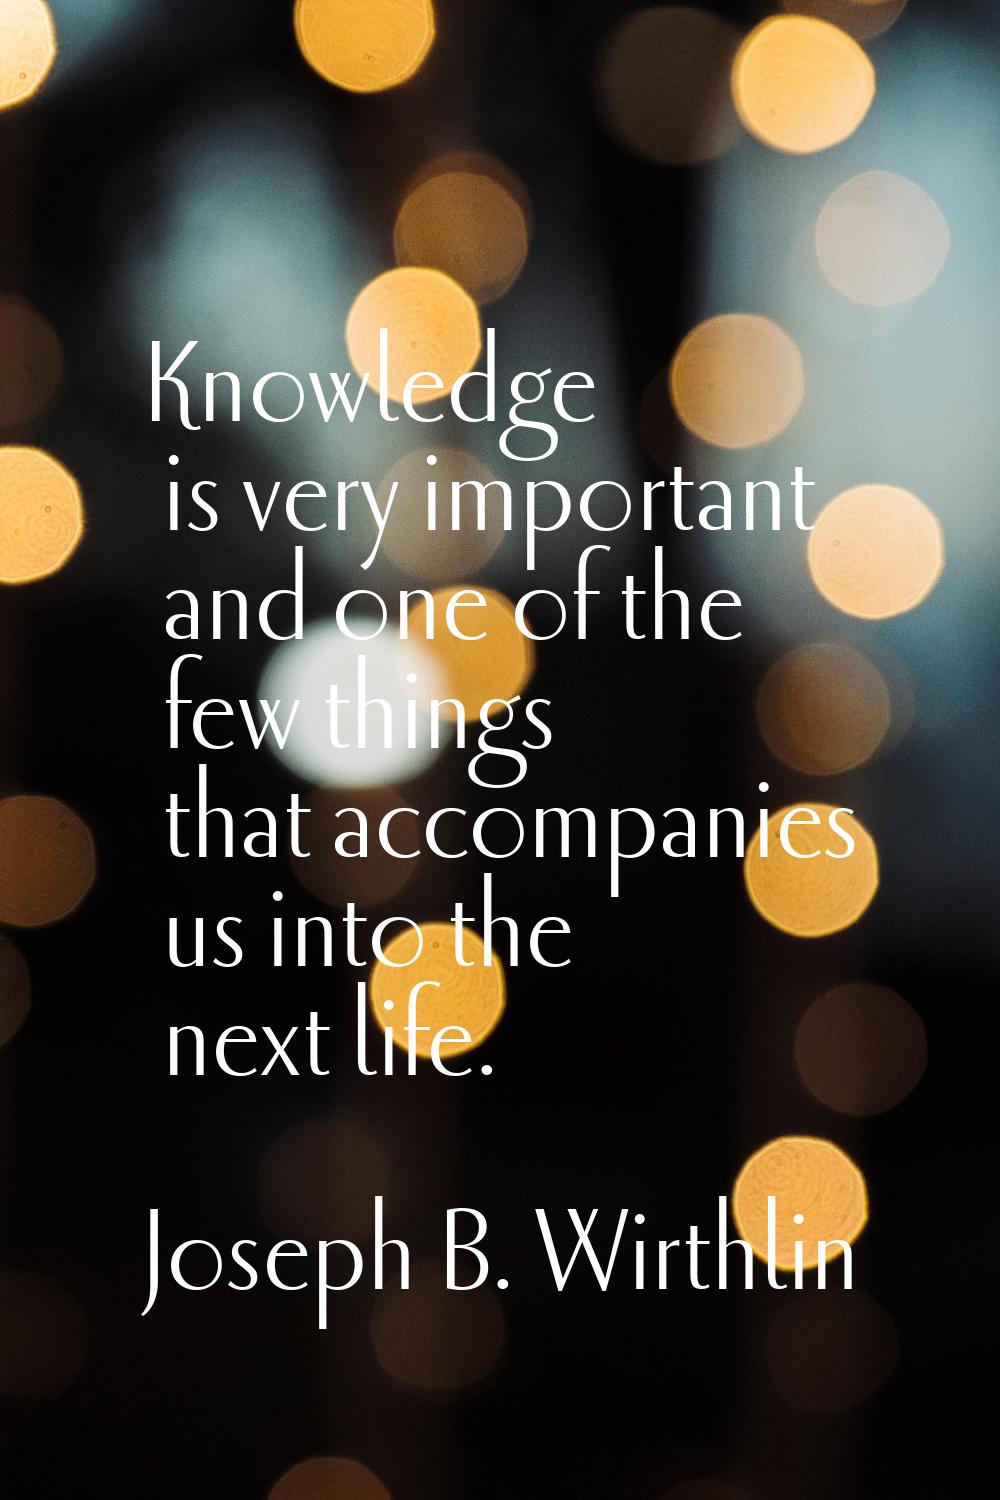 Knowledge is very important and one of the few things that accompanies us into the next life.